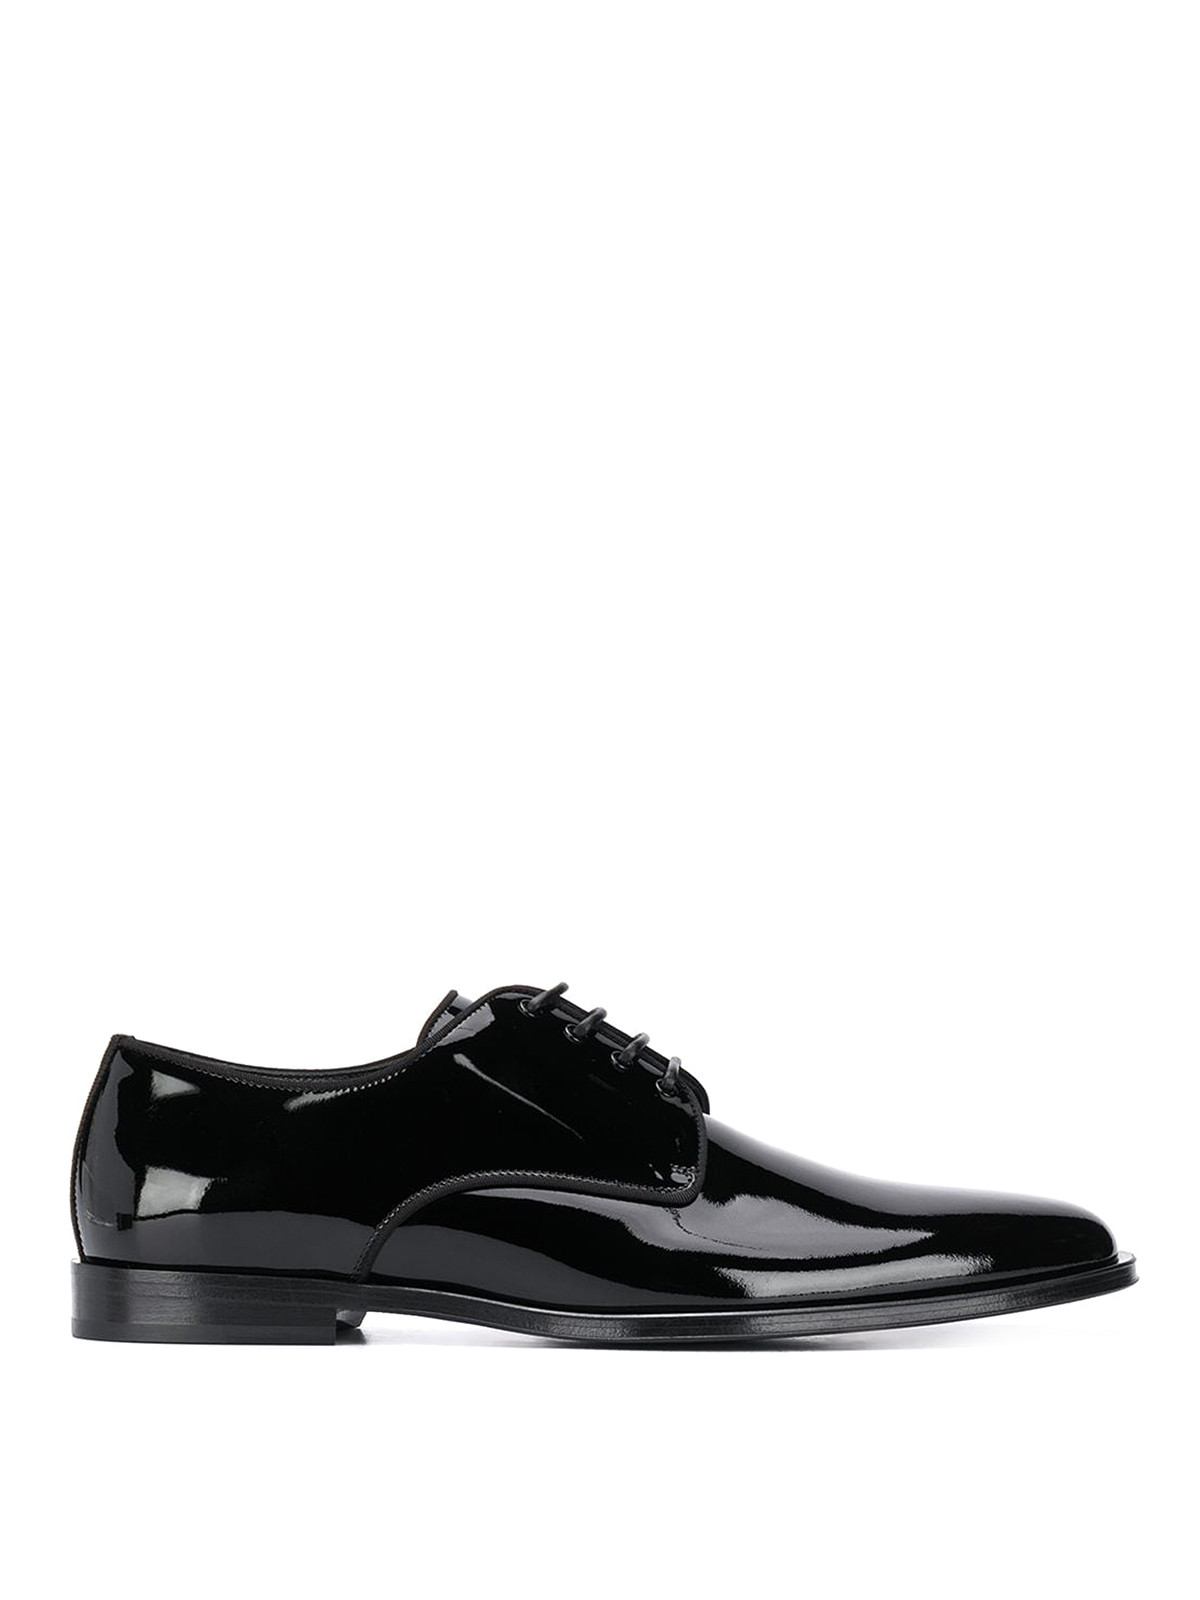 Dolce & Gabbana Leather Glossy Derby In Black